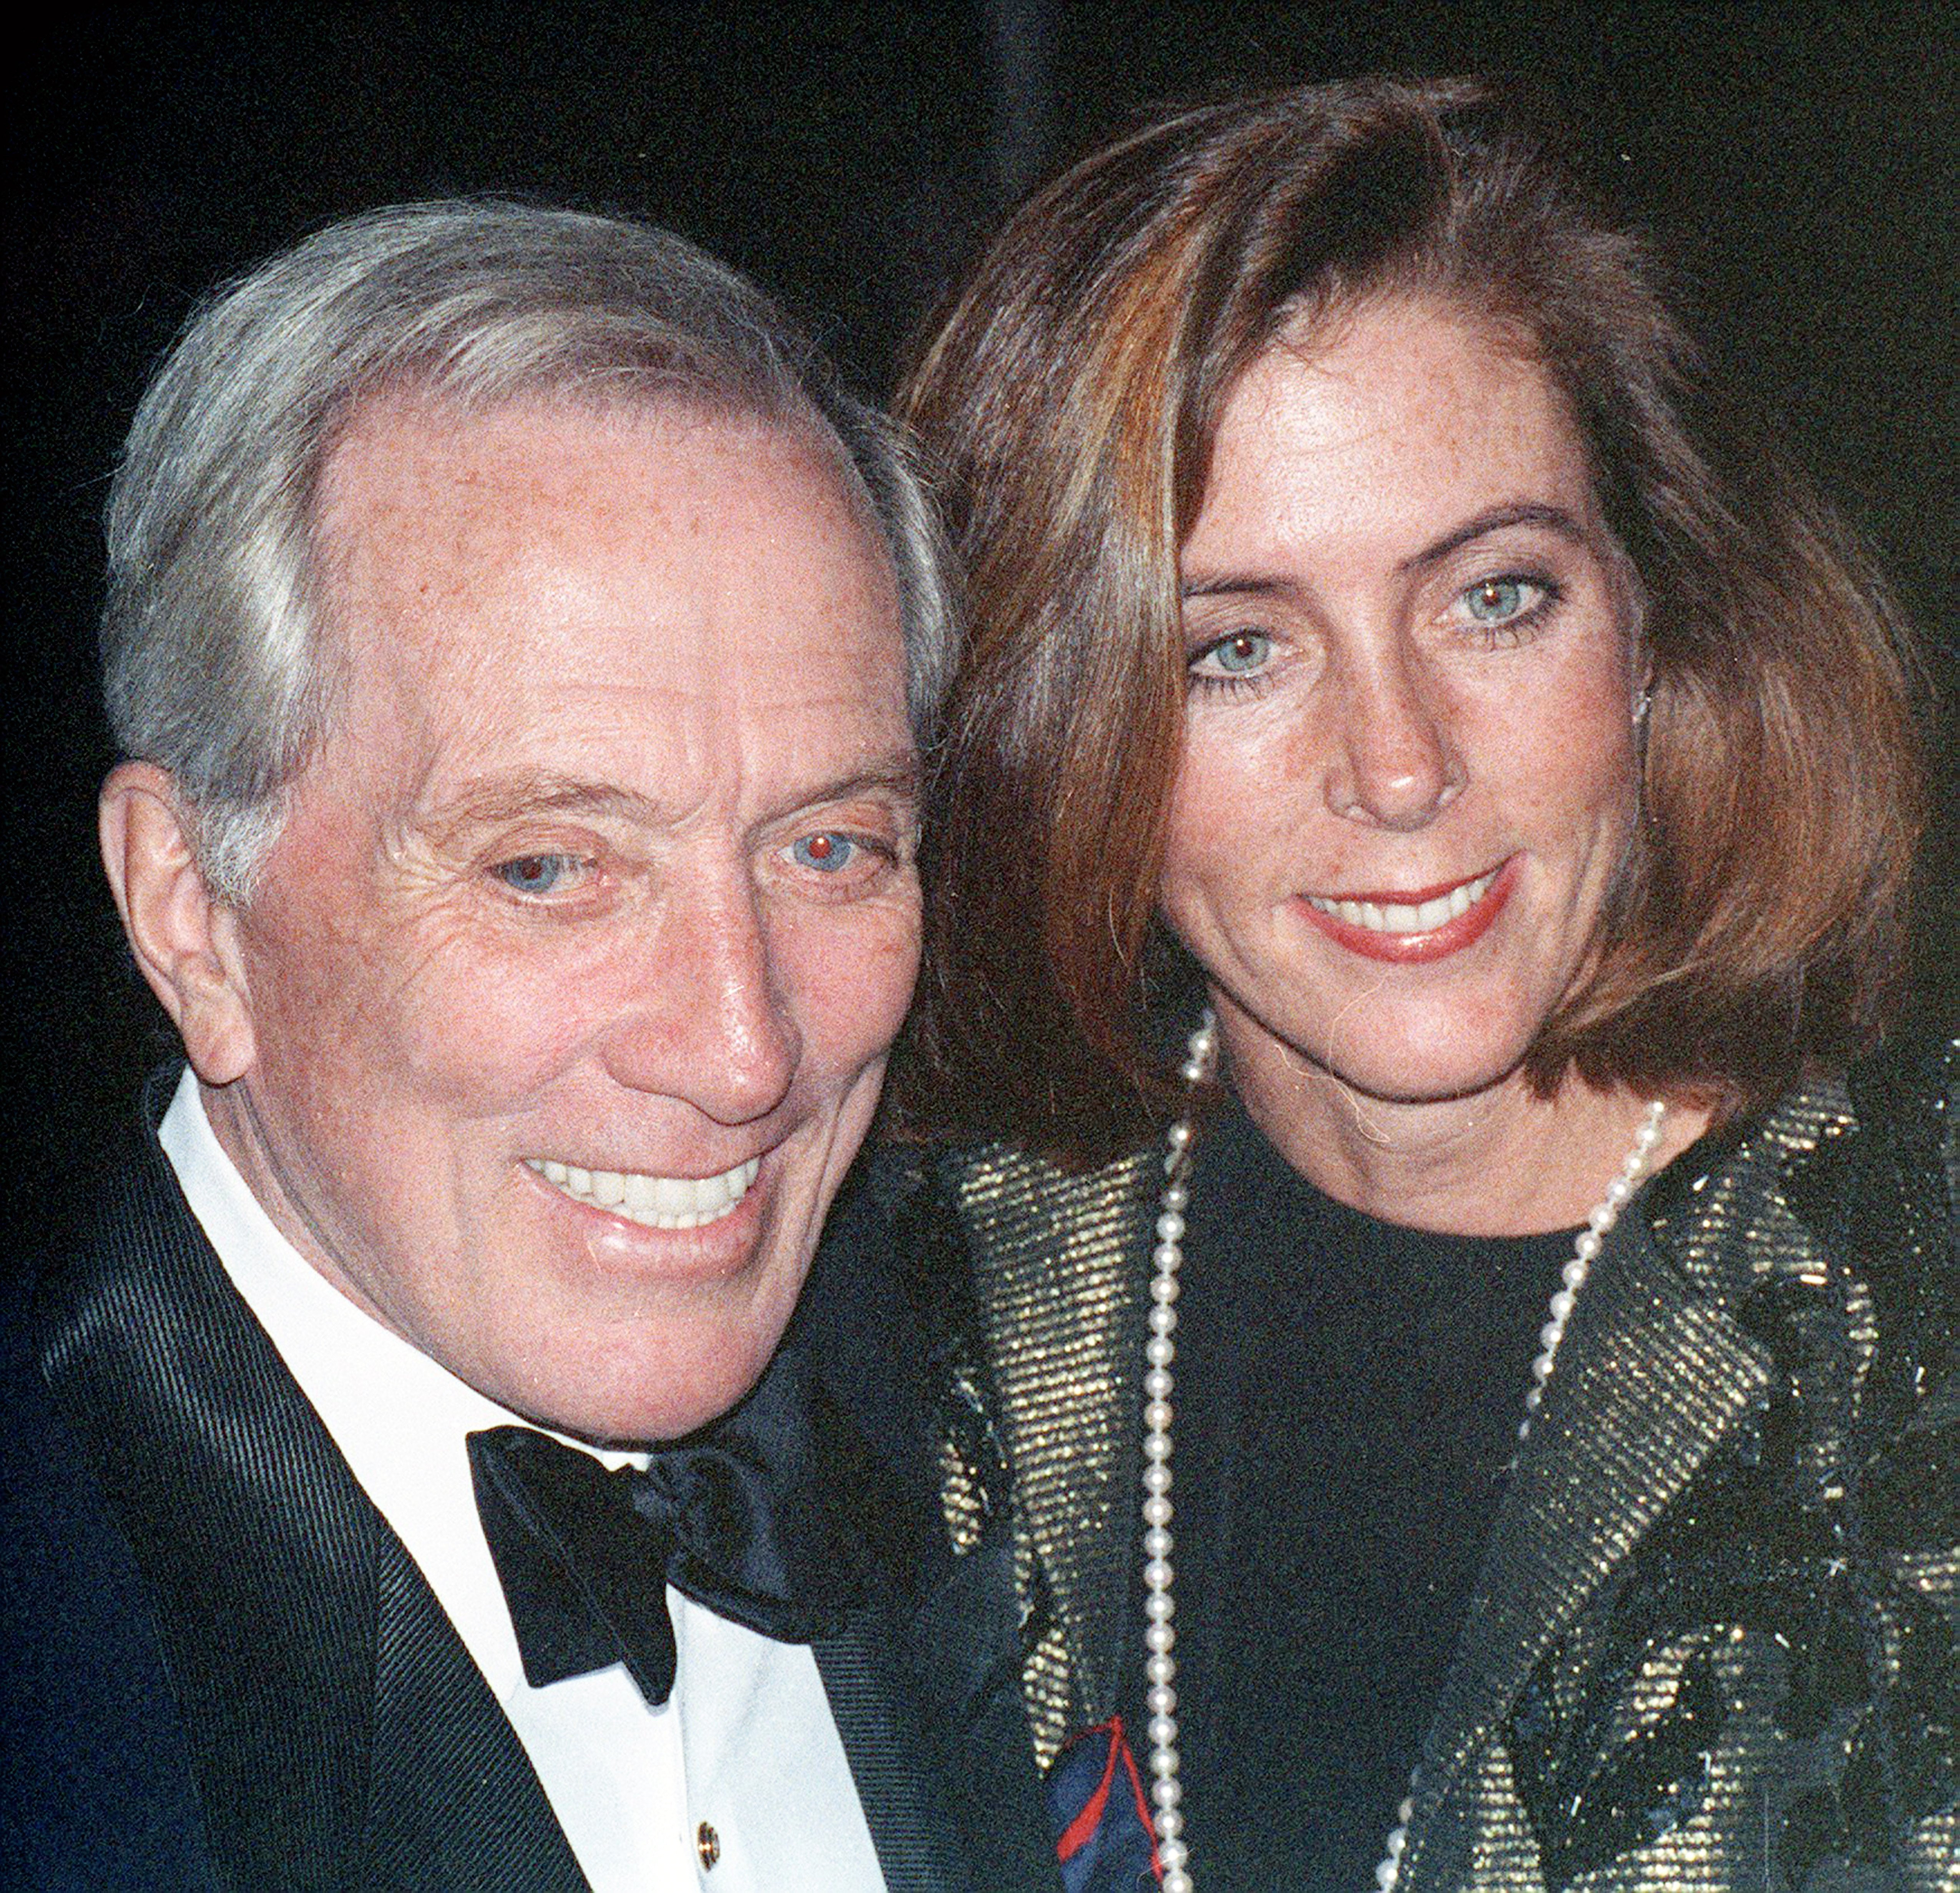 Andy Williams with his wife Debbie at a Daily Variety Gala Honoring Army Archerd at the Beverly Hilton Hotel in Beverly Hills, California, January  | Source: Getty Images